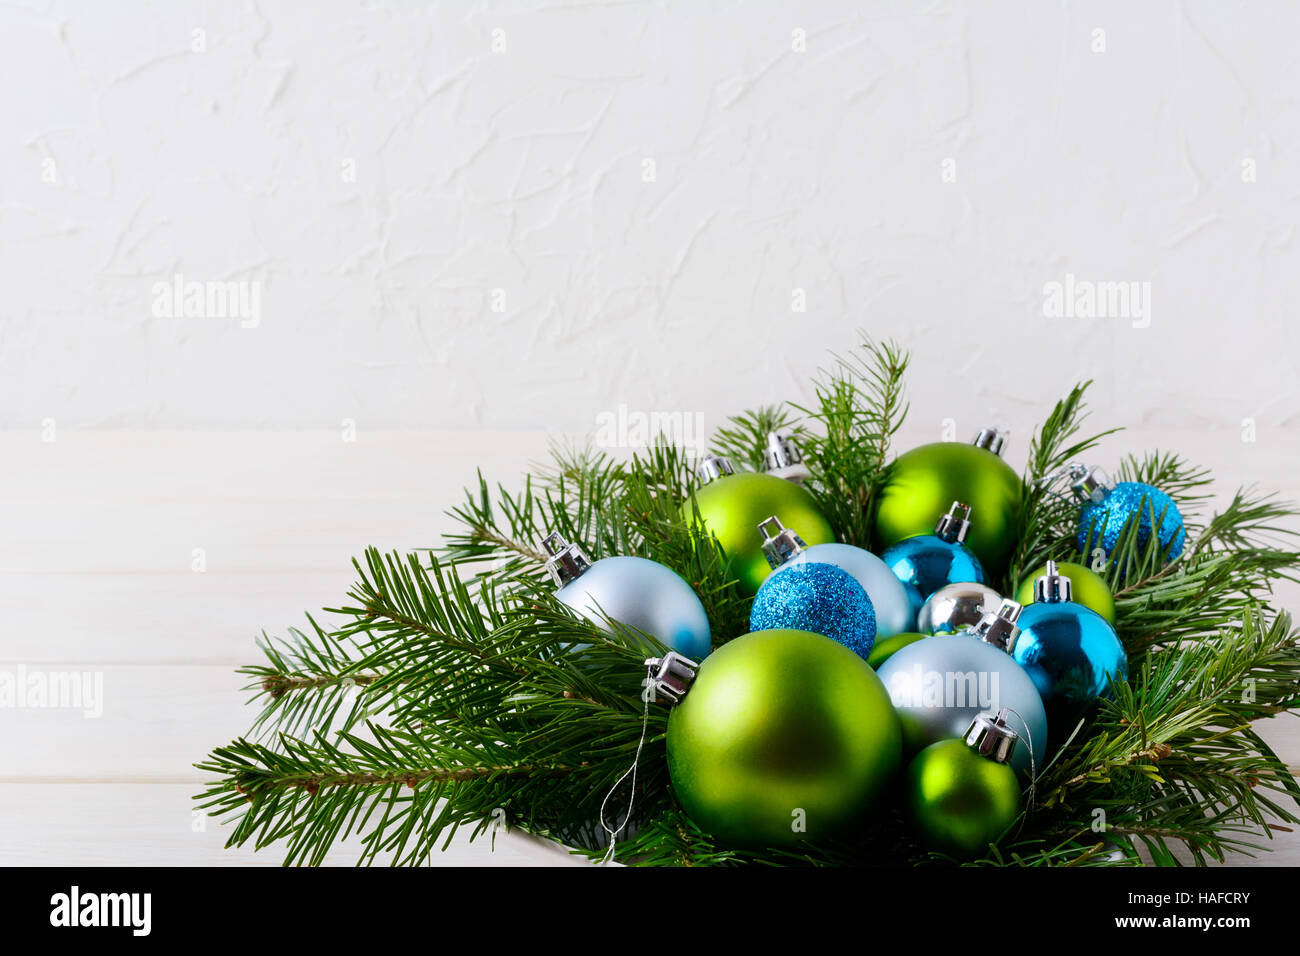 Navy Blue Glitter Christmas Abstract Background Stock Photo, Picture and  Royalty Free Image. Image 35817112.